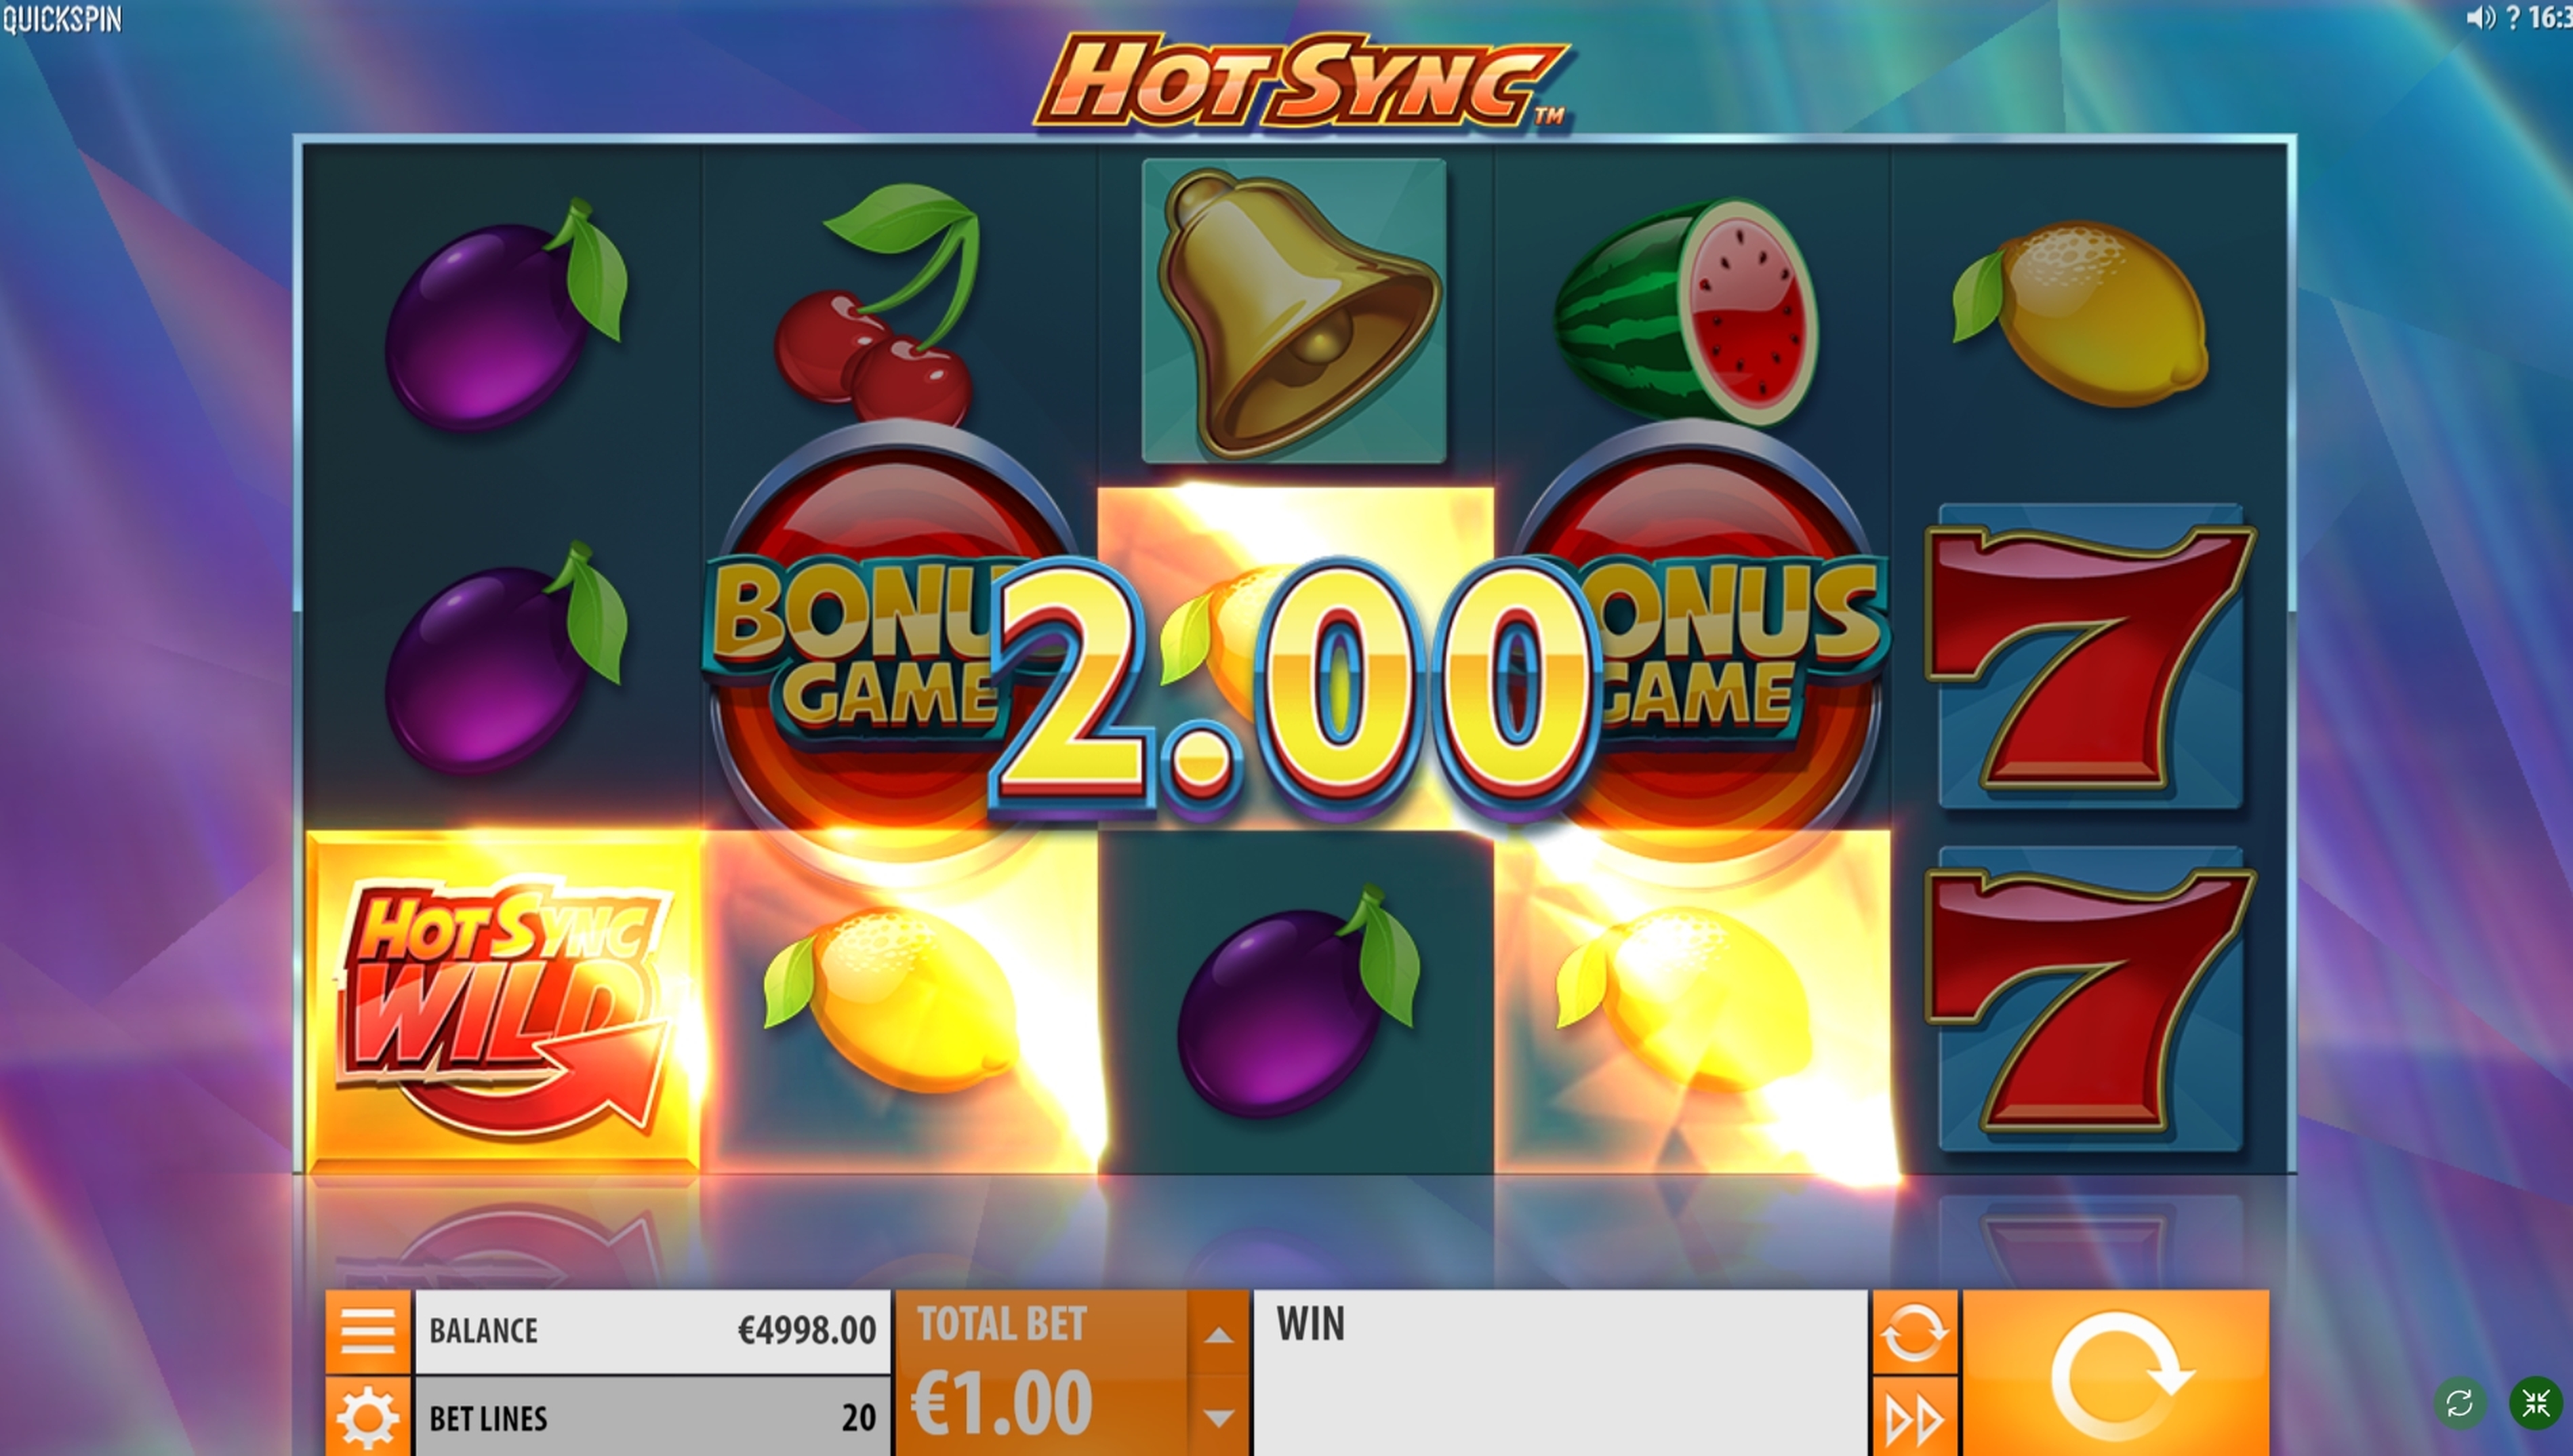 Win Money in Hot Sync Free Slot Game by Quickspin